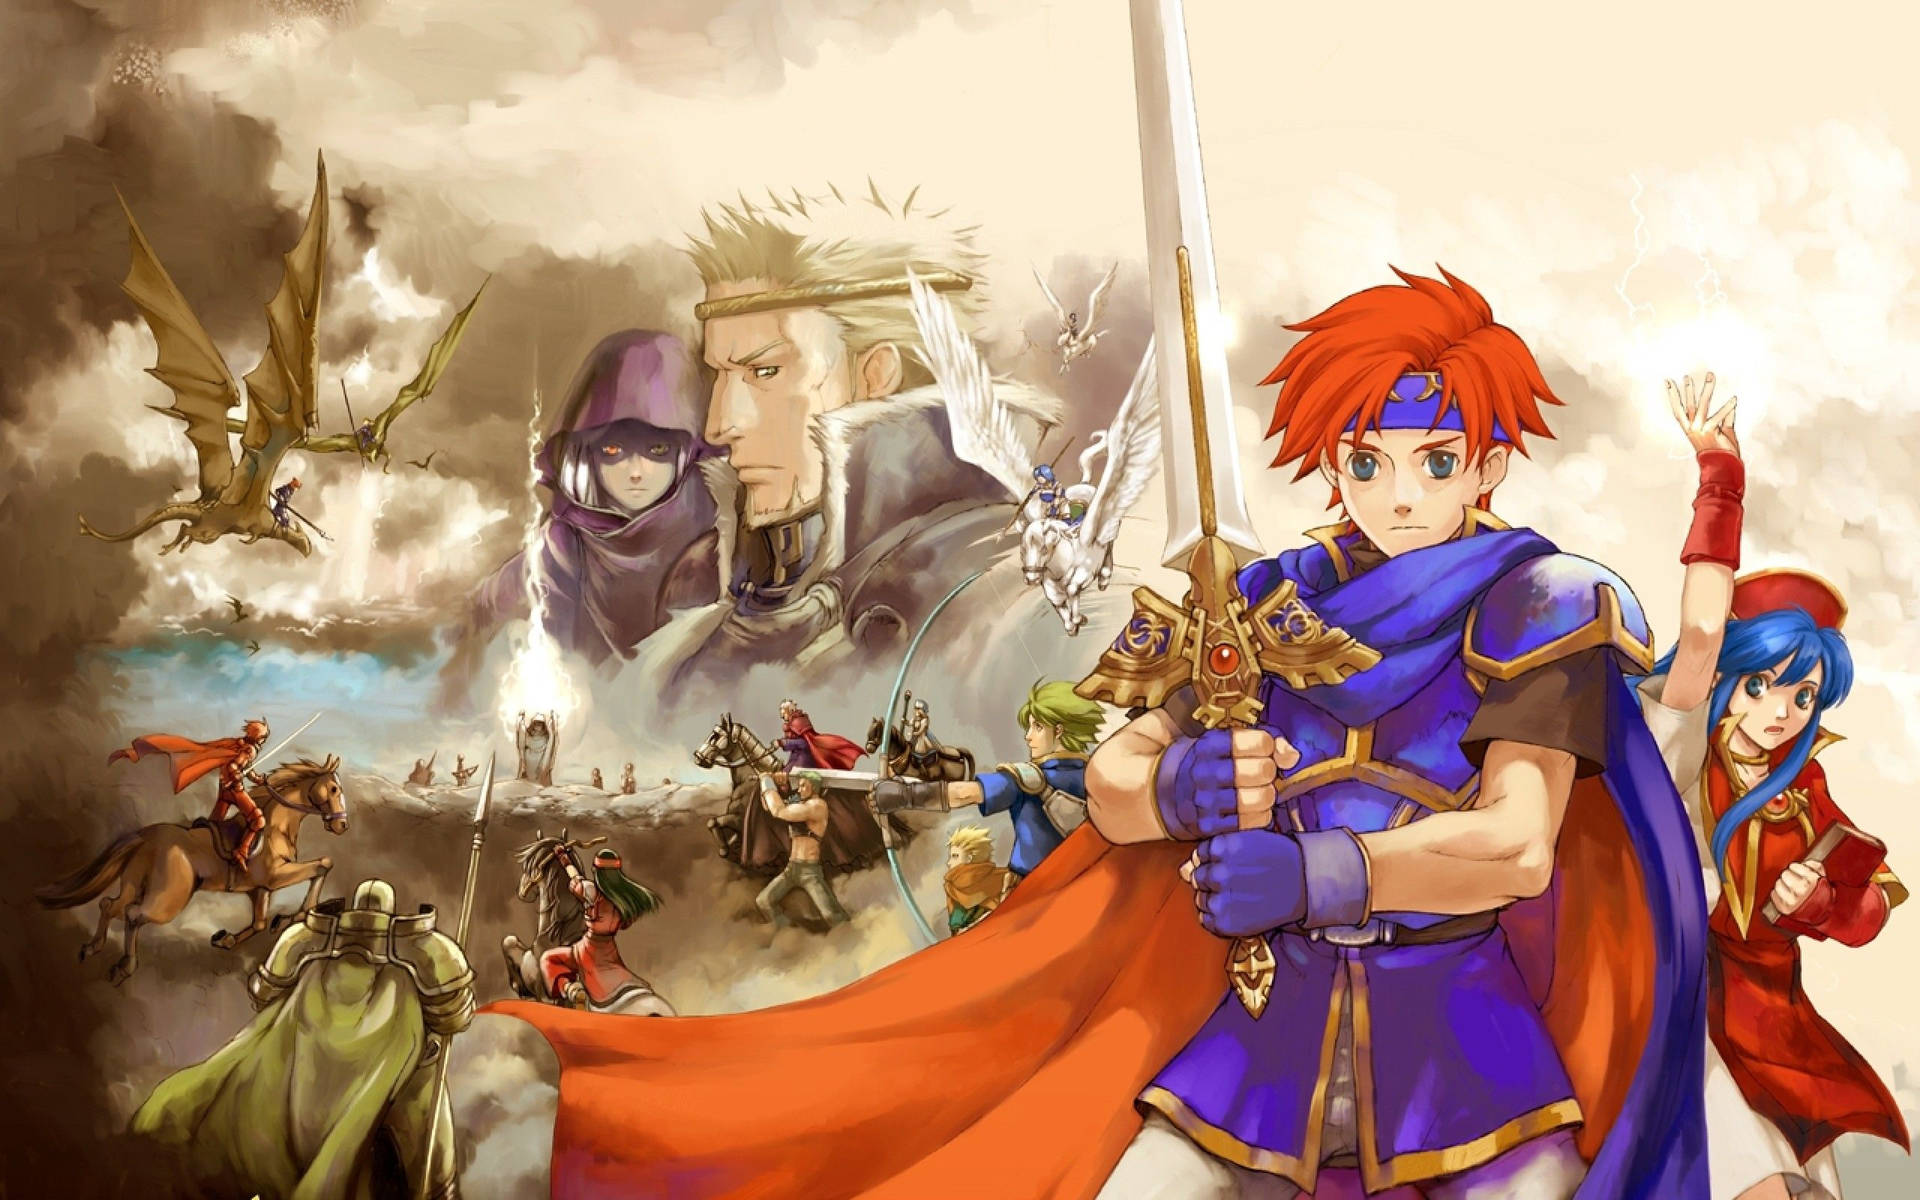 Image  Roy battles with courage in the Fire Emblem battlefield Wallpaper